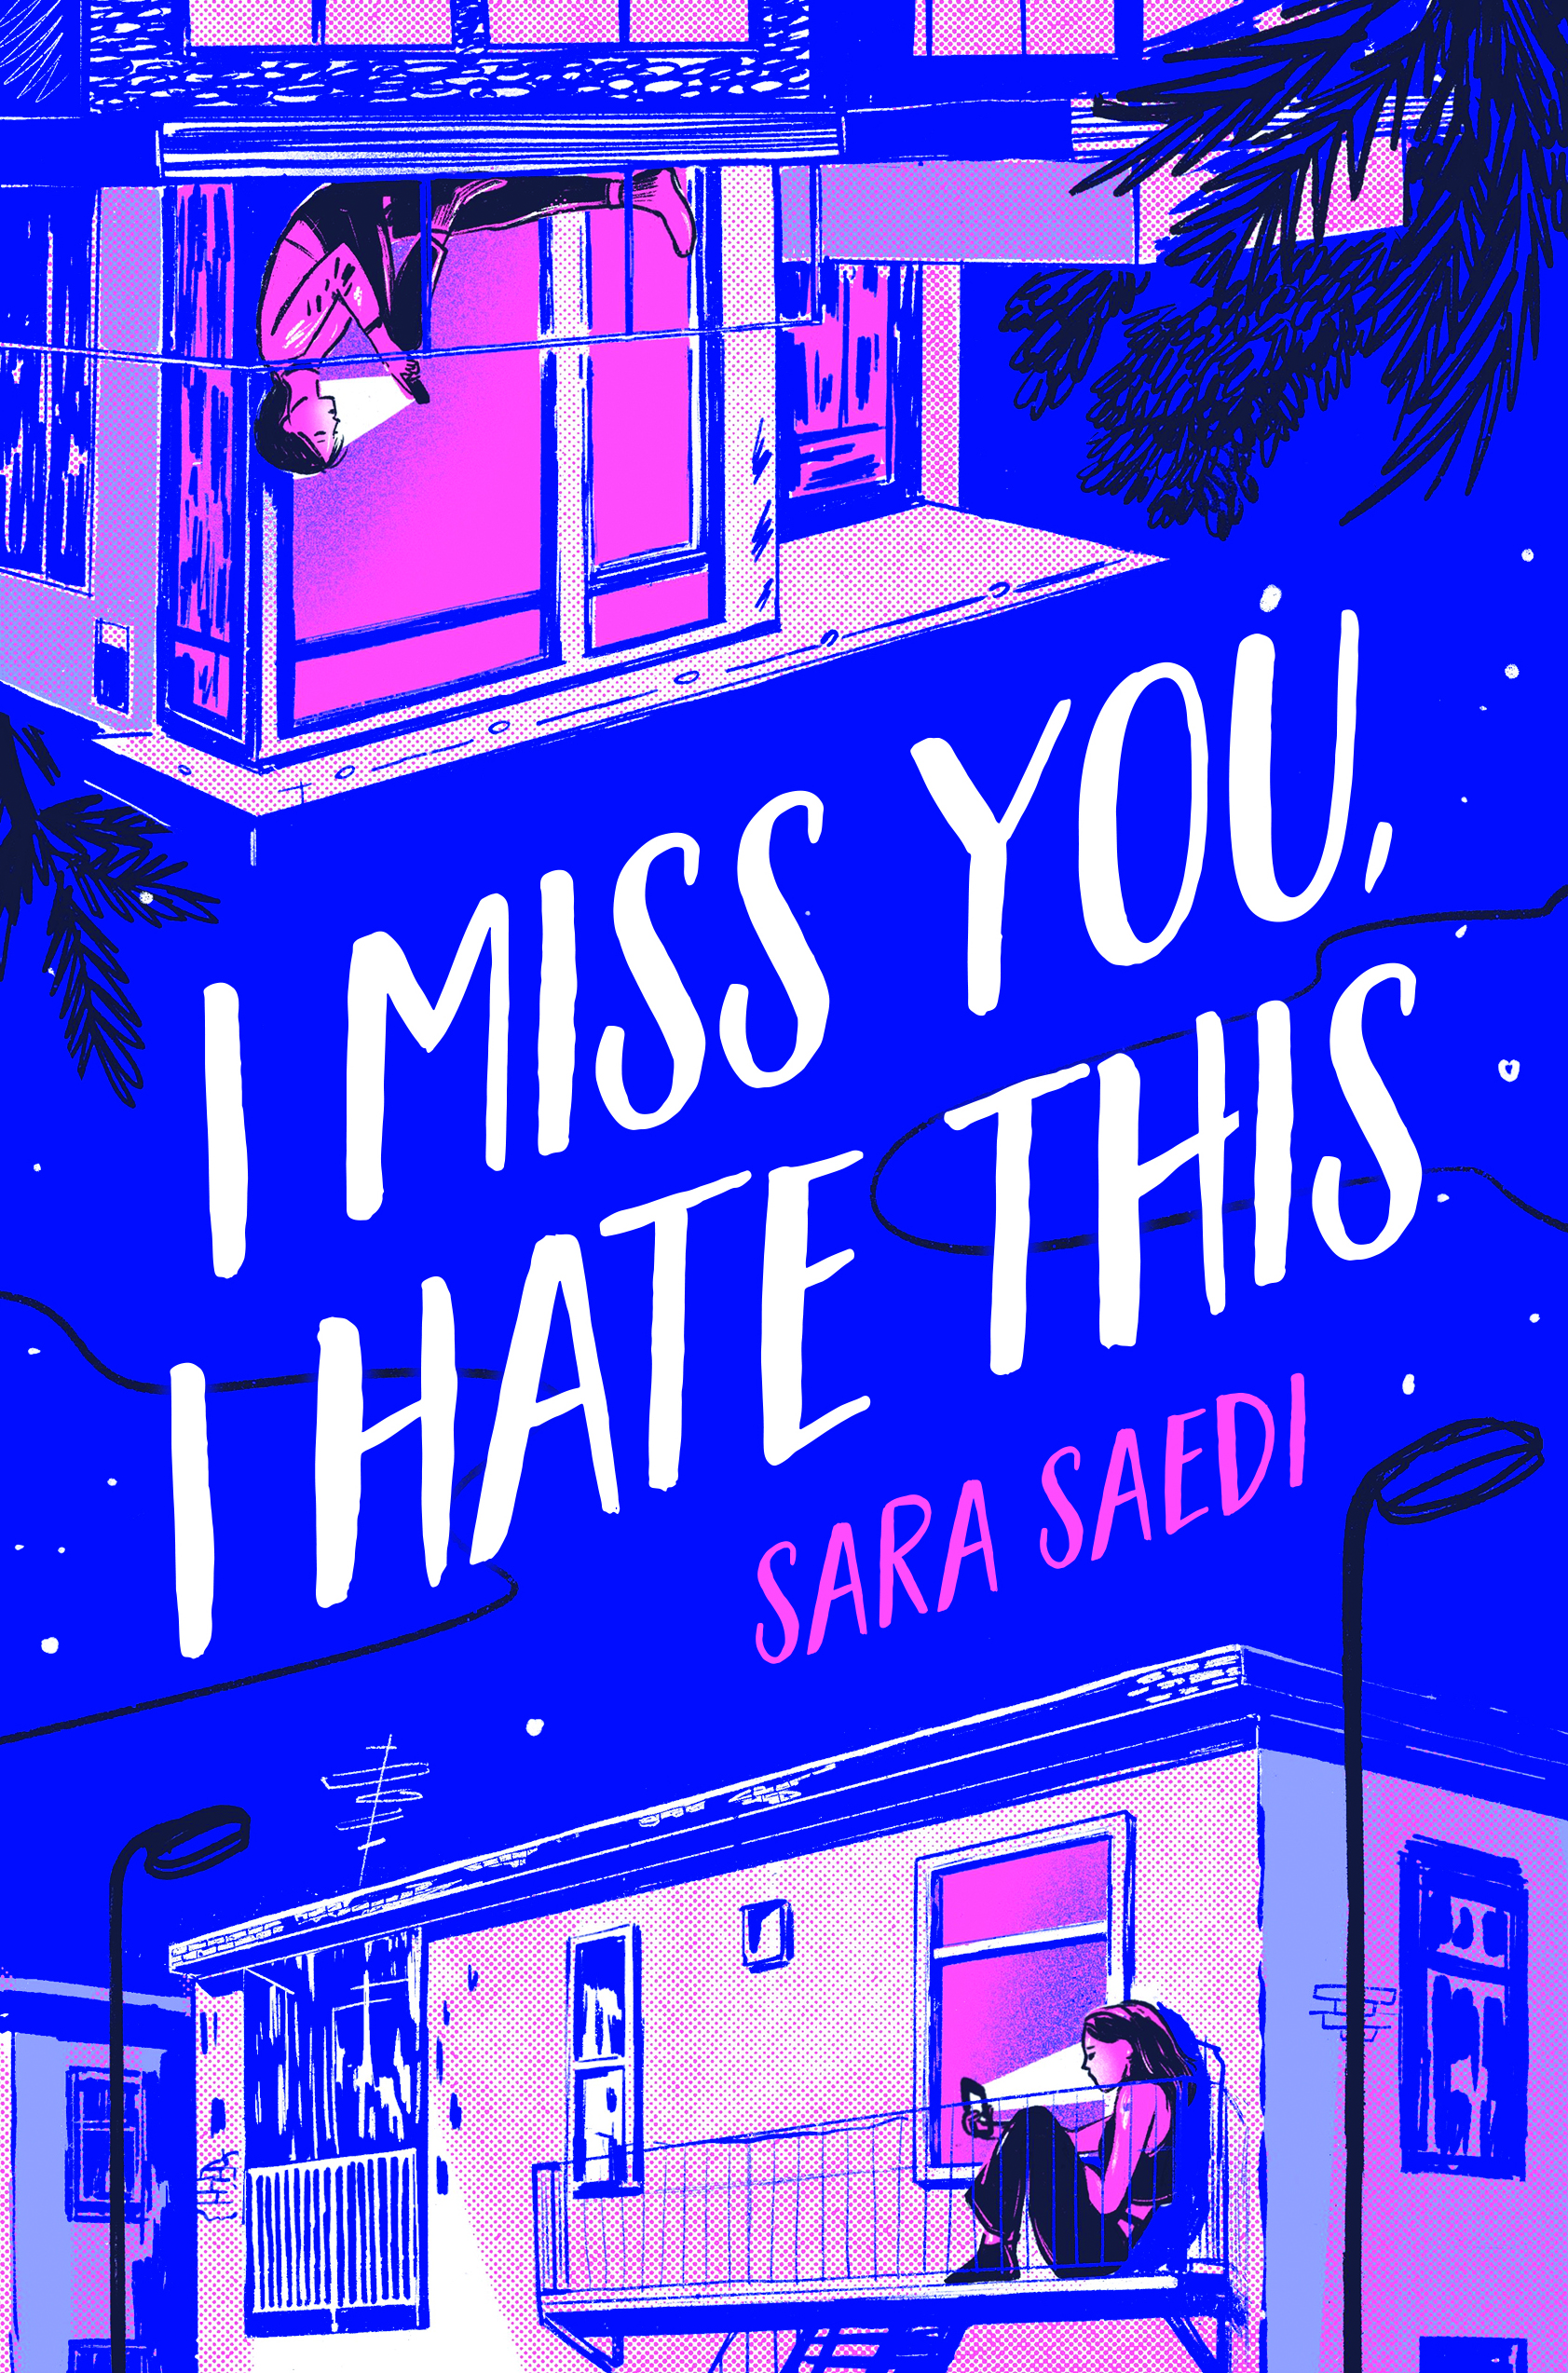 I Wrote a Book About the Pandemic. I’m Scared No One Will Want to Read It, a guest post by Sara Saedi